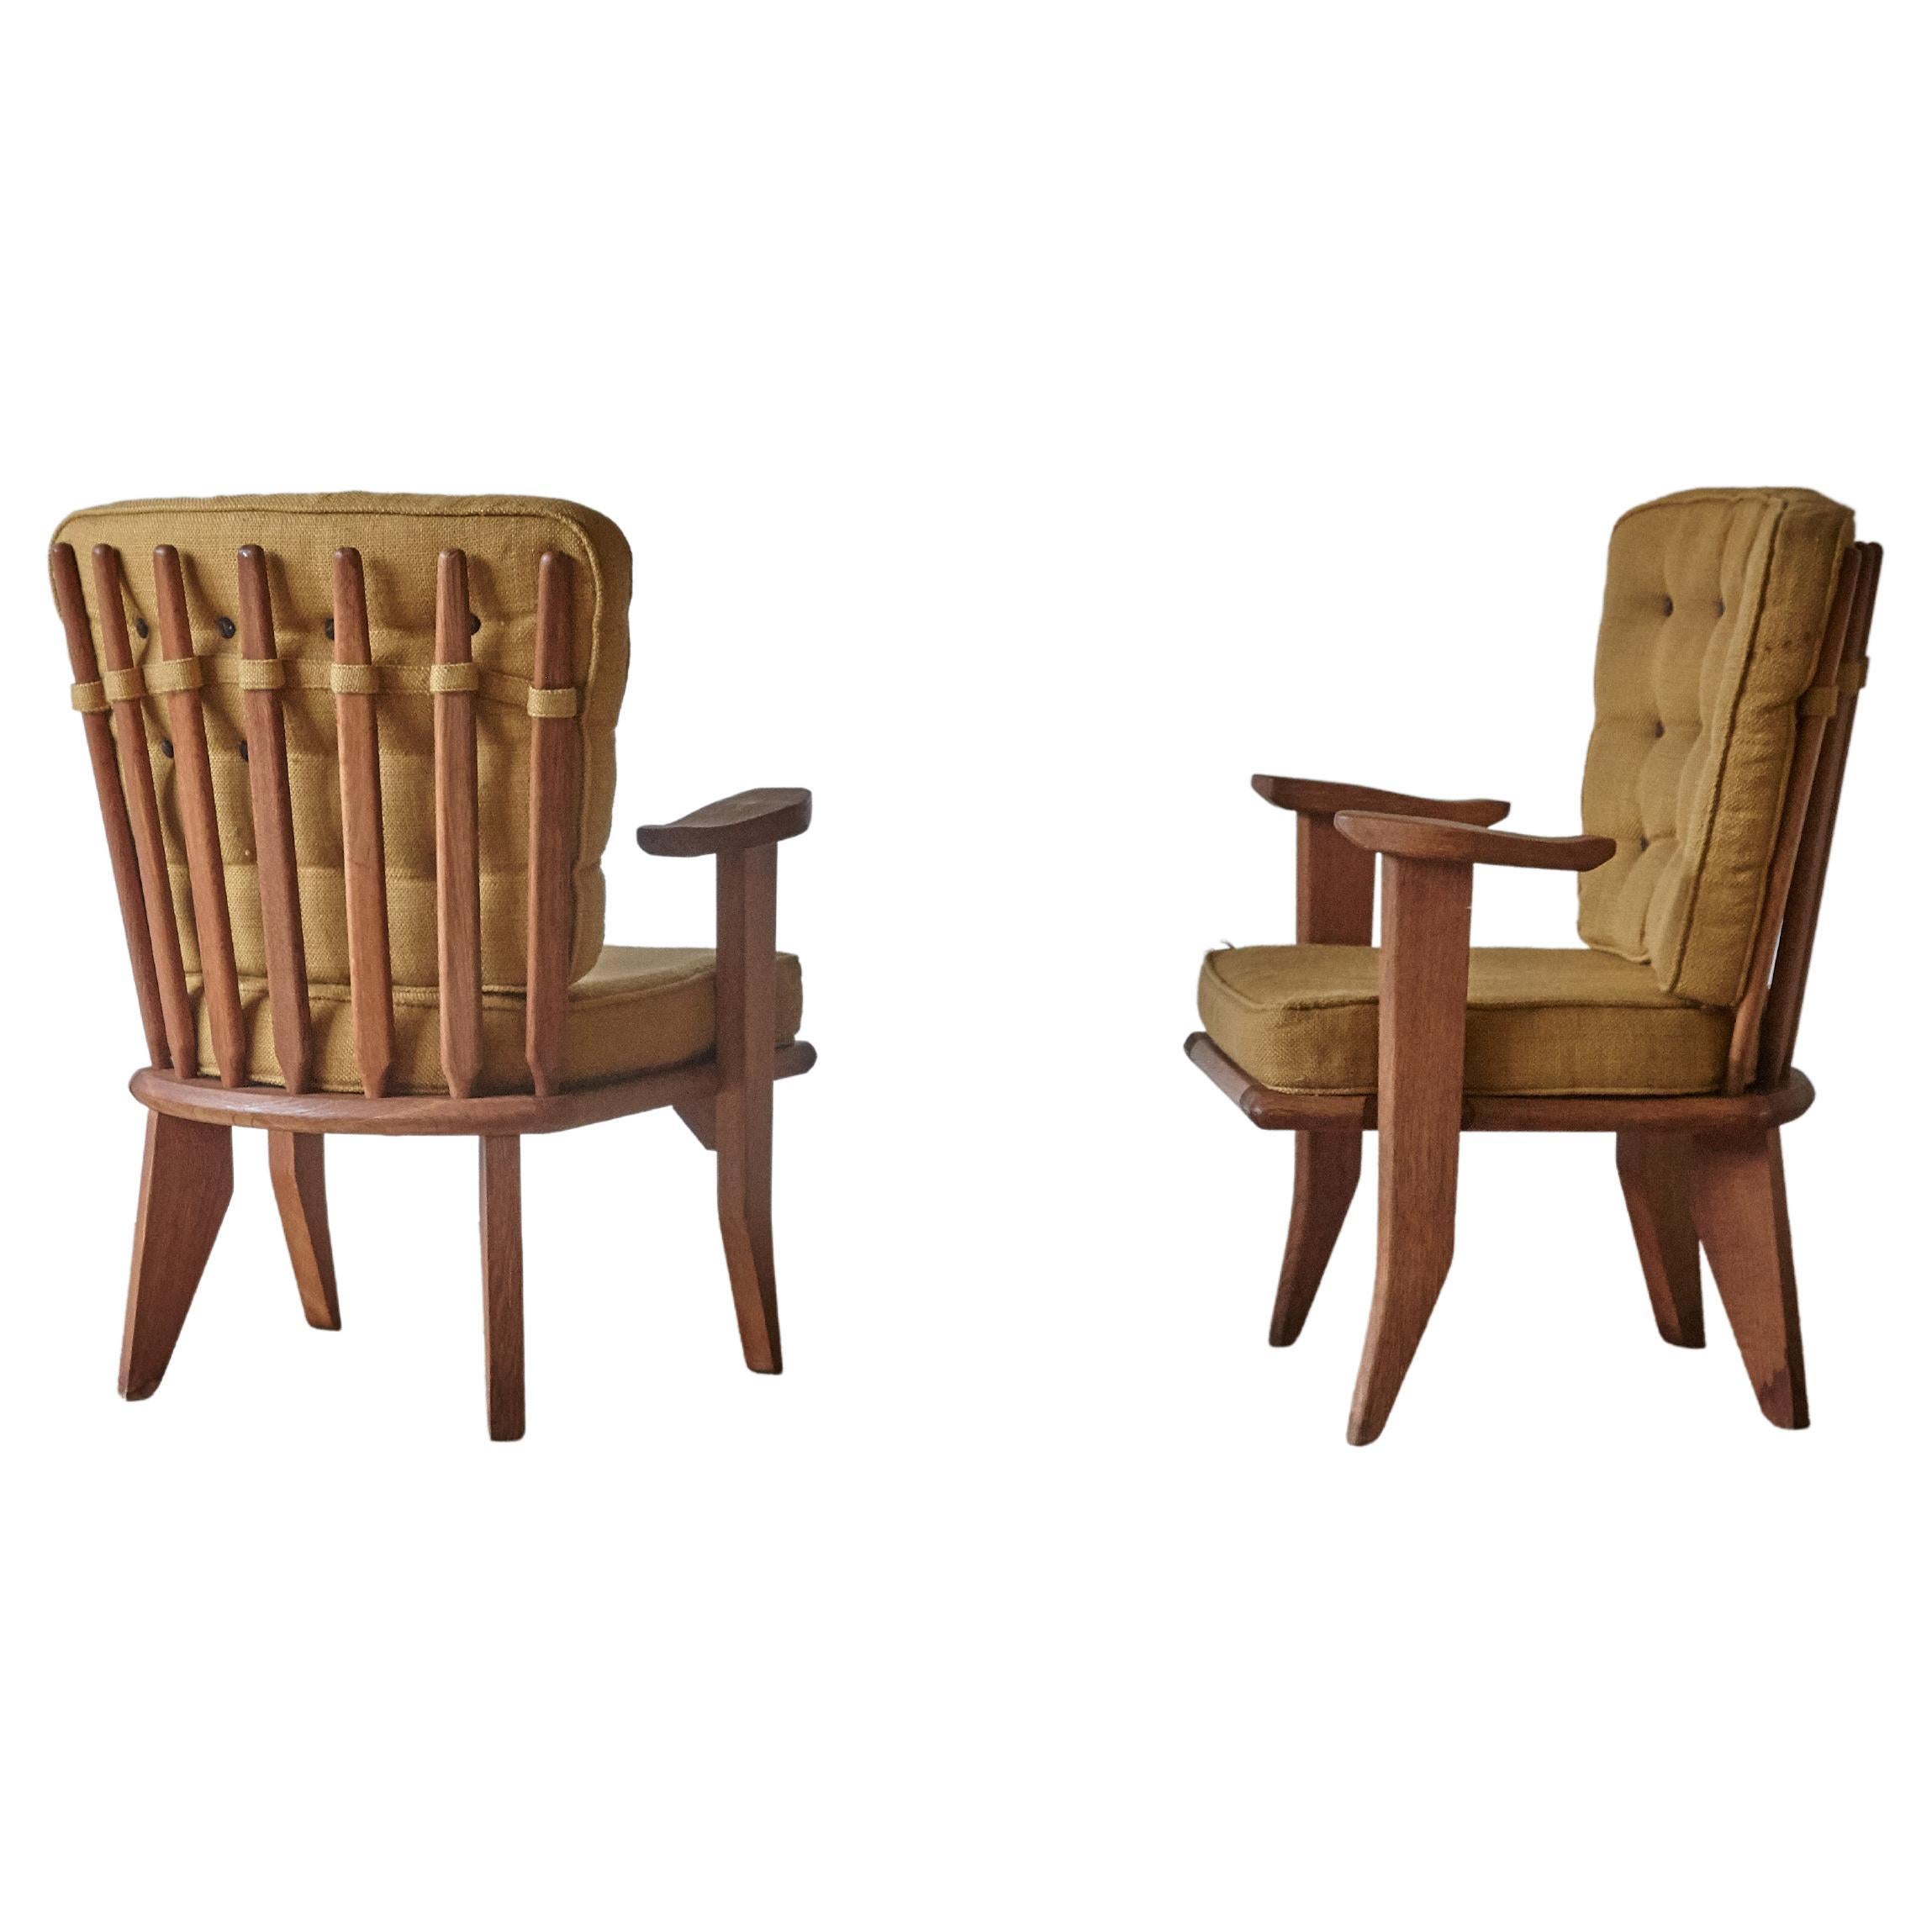 Guillerme et Chambron Oak Lounge Chairs / Armchairs, France, 1960s